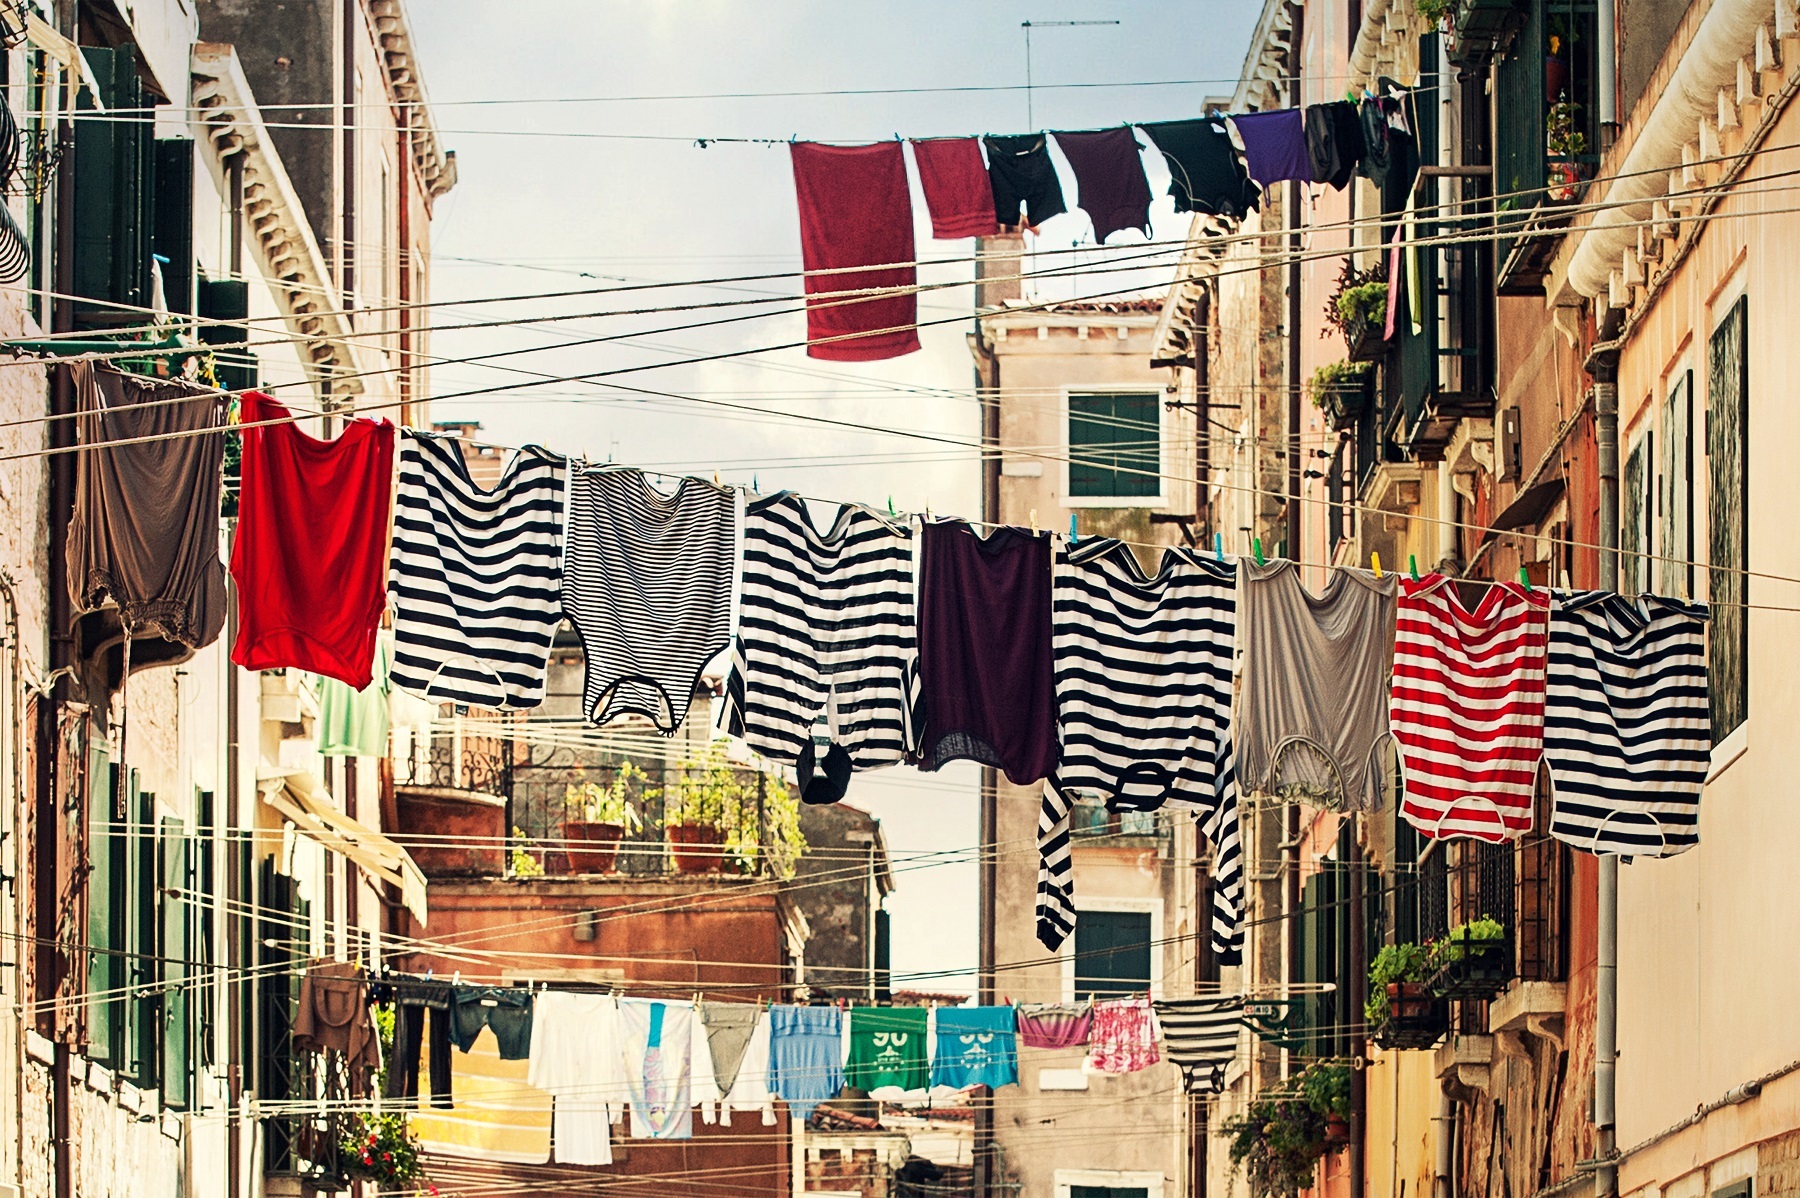 Clothesline with colorful clothes